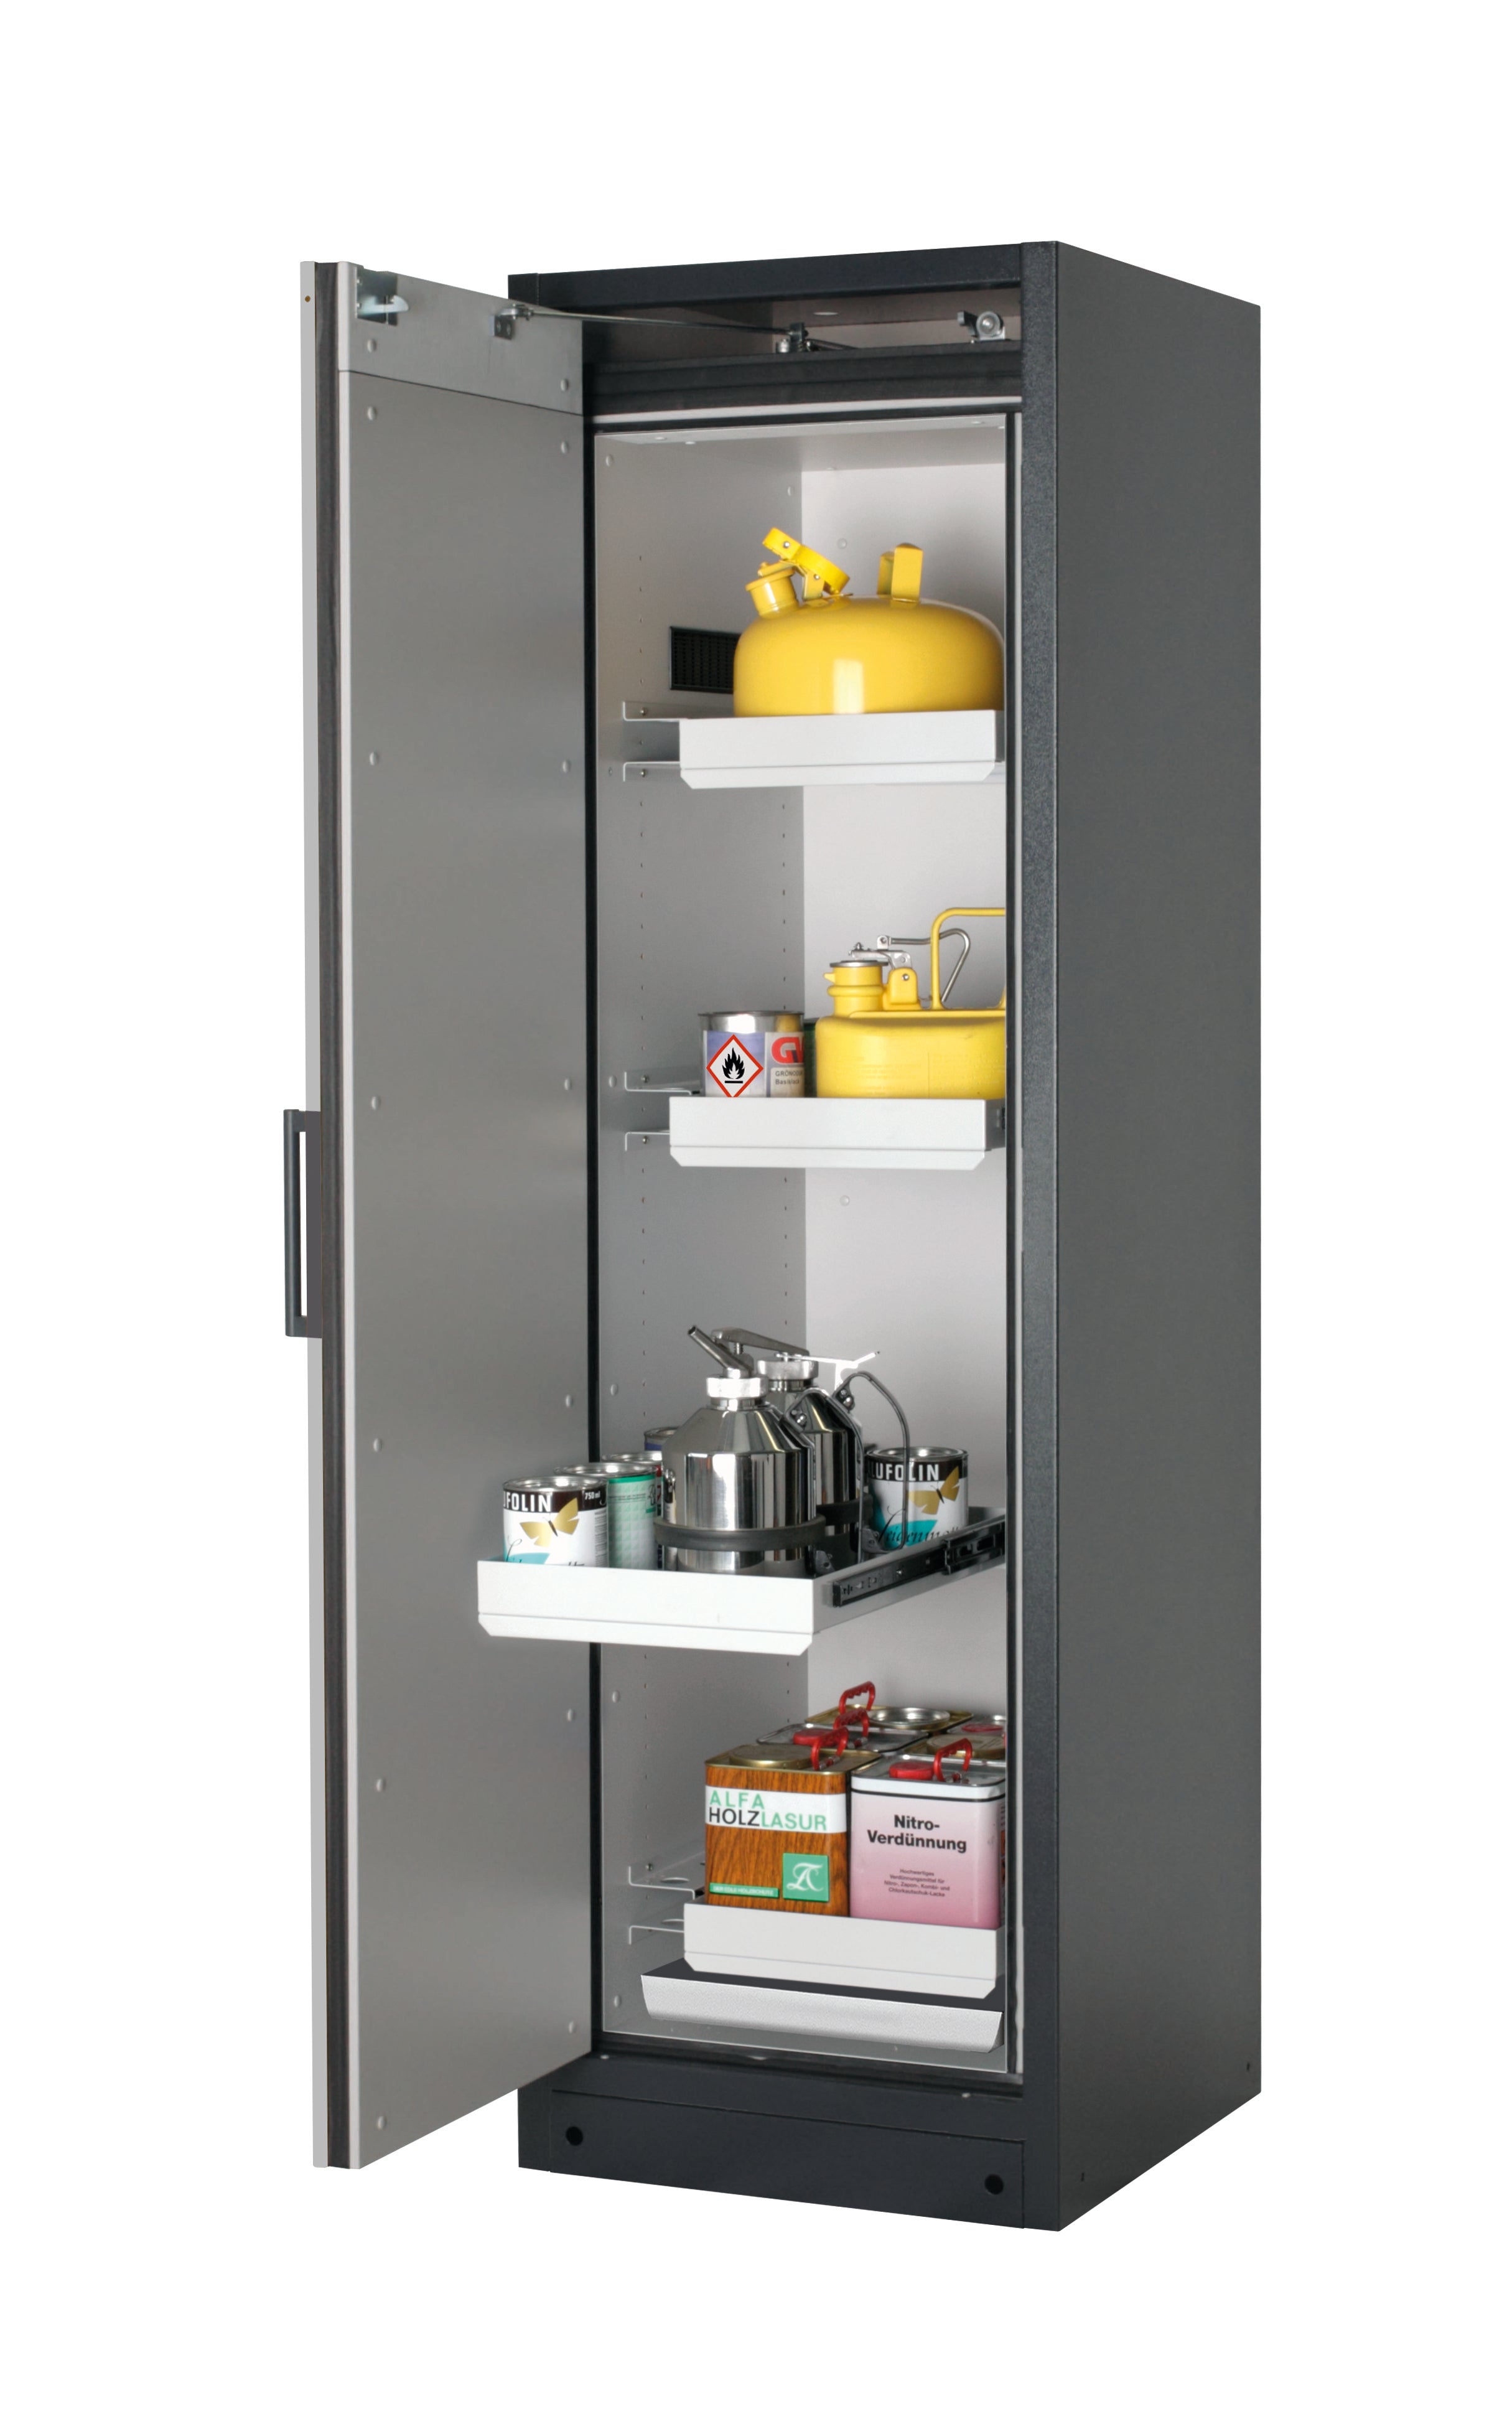 Type 90 safety storage cabinet Q-PEGASUS-90 model Q90.195.060.WDAC in asecos silver with 4x drawer (standard) (sheet steel),